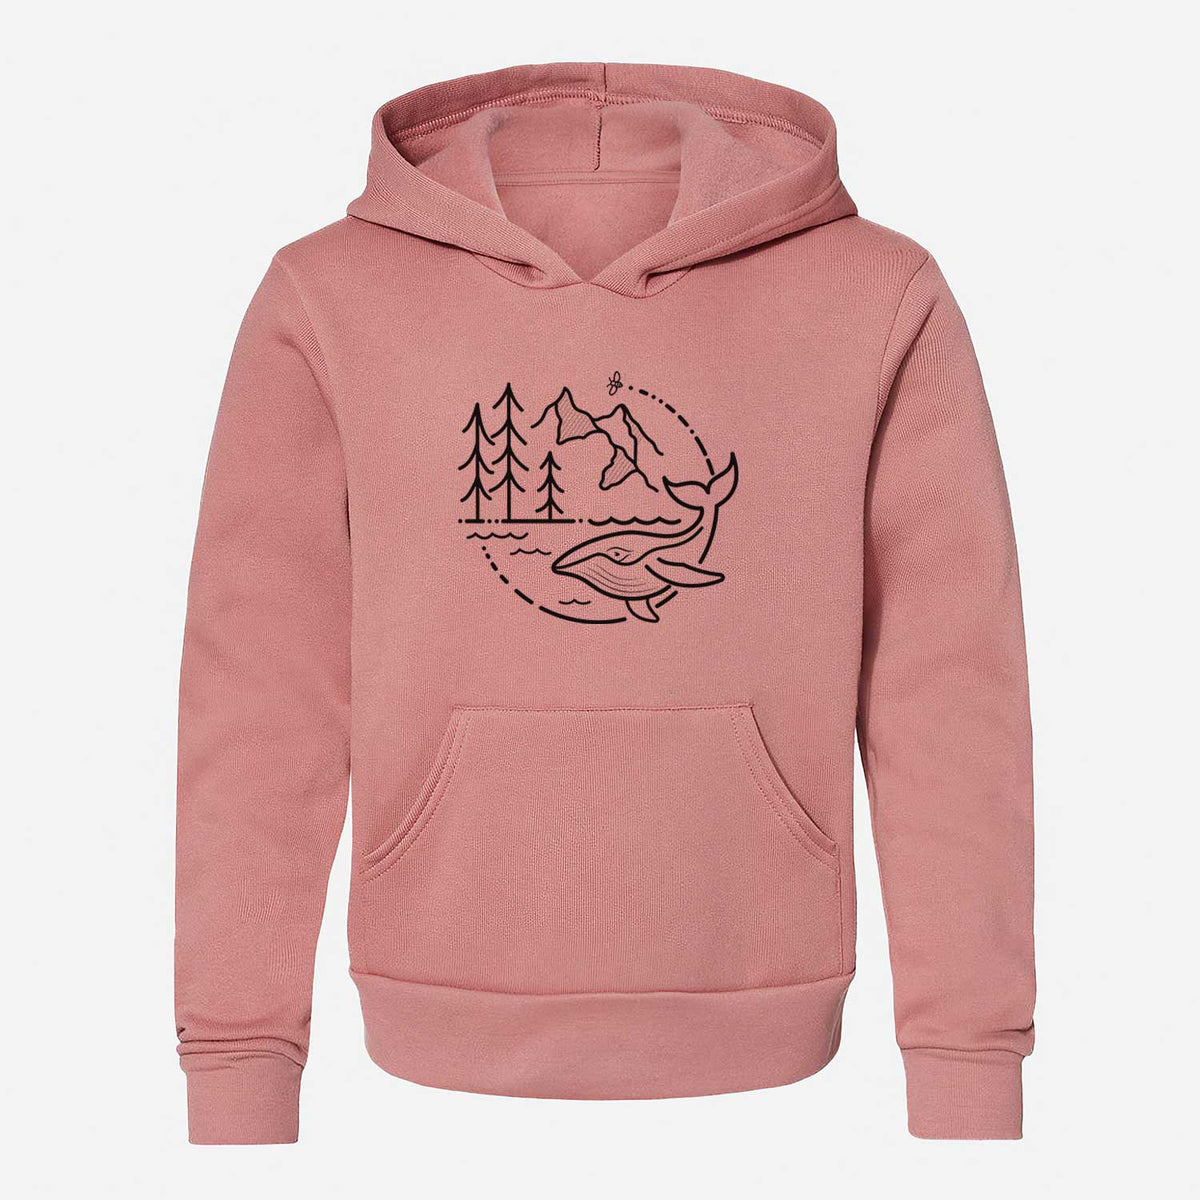 It&#39;s All Connected - Youth Hoodie Sweatshirt